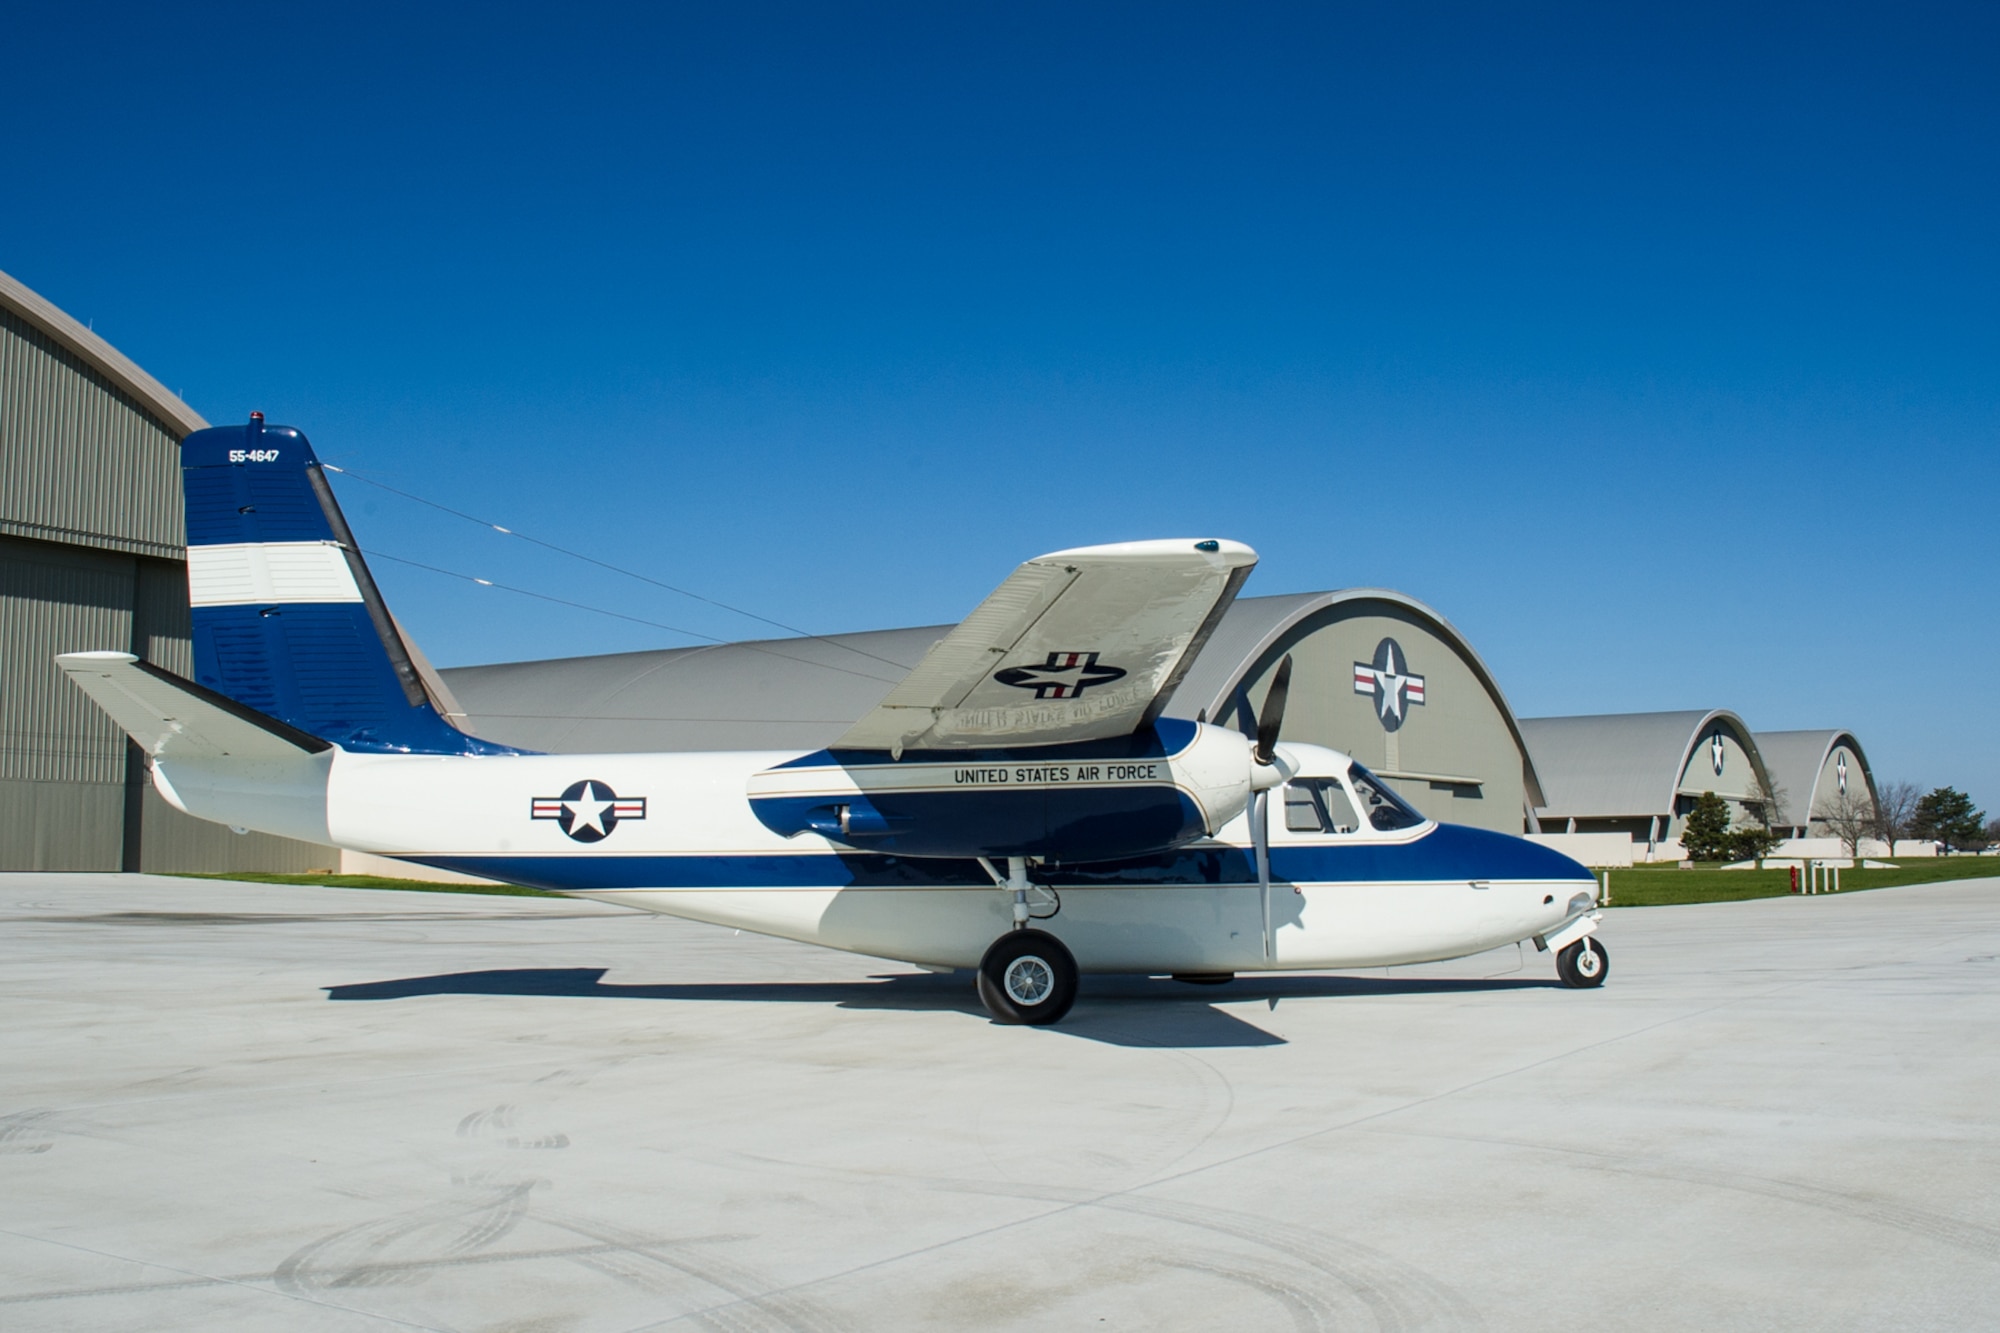 DAYTON, Ohio -- The Aero Commander U-4B at the National Museum of the United States Air Force on April 12, 2016. This aircraft is one of ten Presidential aircraft in the collection. (U.S. Air Force photo by Ken LaRock)